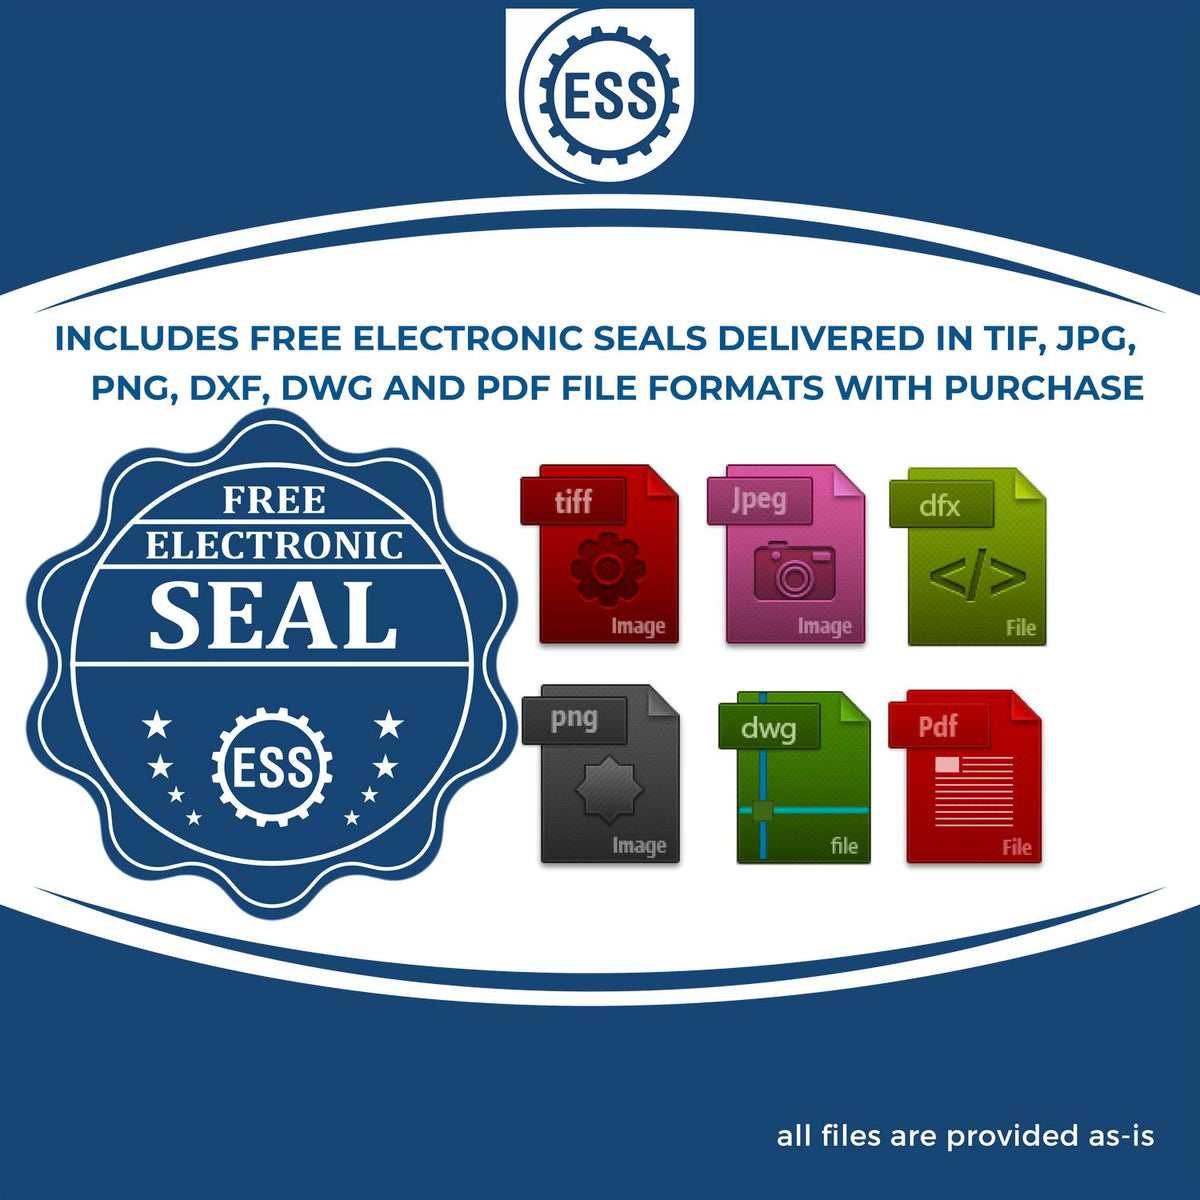 An infographic for the free electronic seal for the Heavy Duty Cast Iron Missouri Land Surveyor Seal Embosser illustrating the different file type icons such as DXF, DWG, TIF, JPG and PNG.